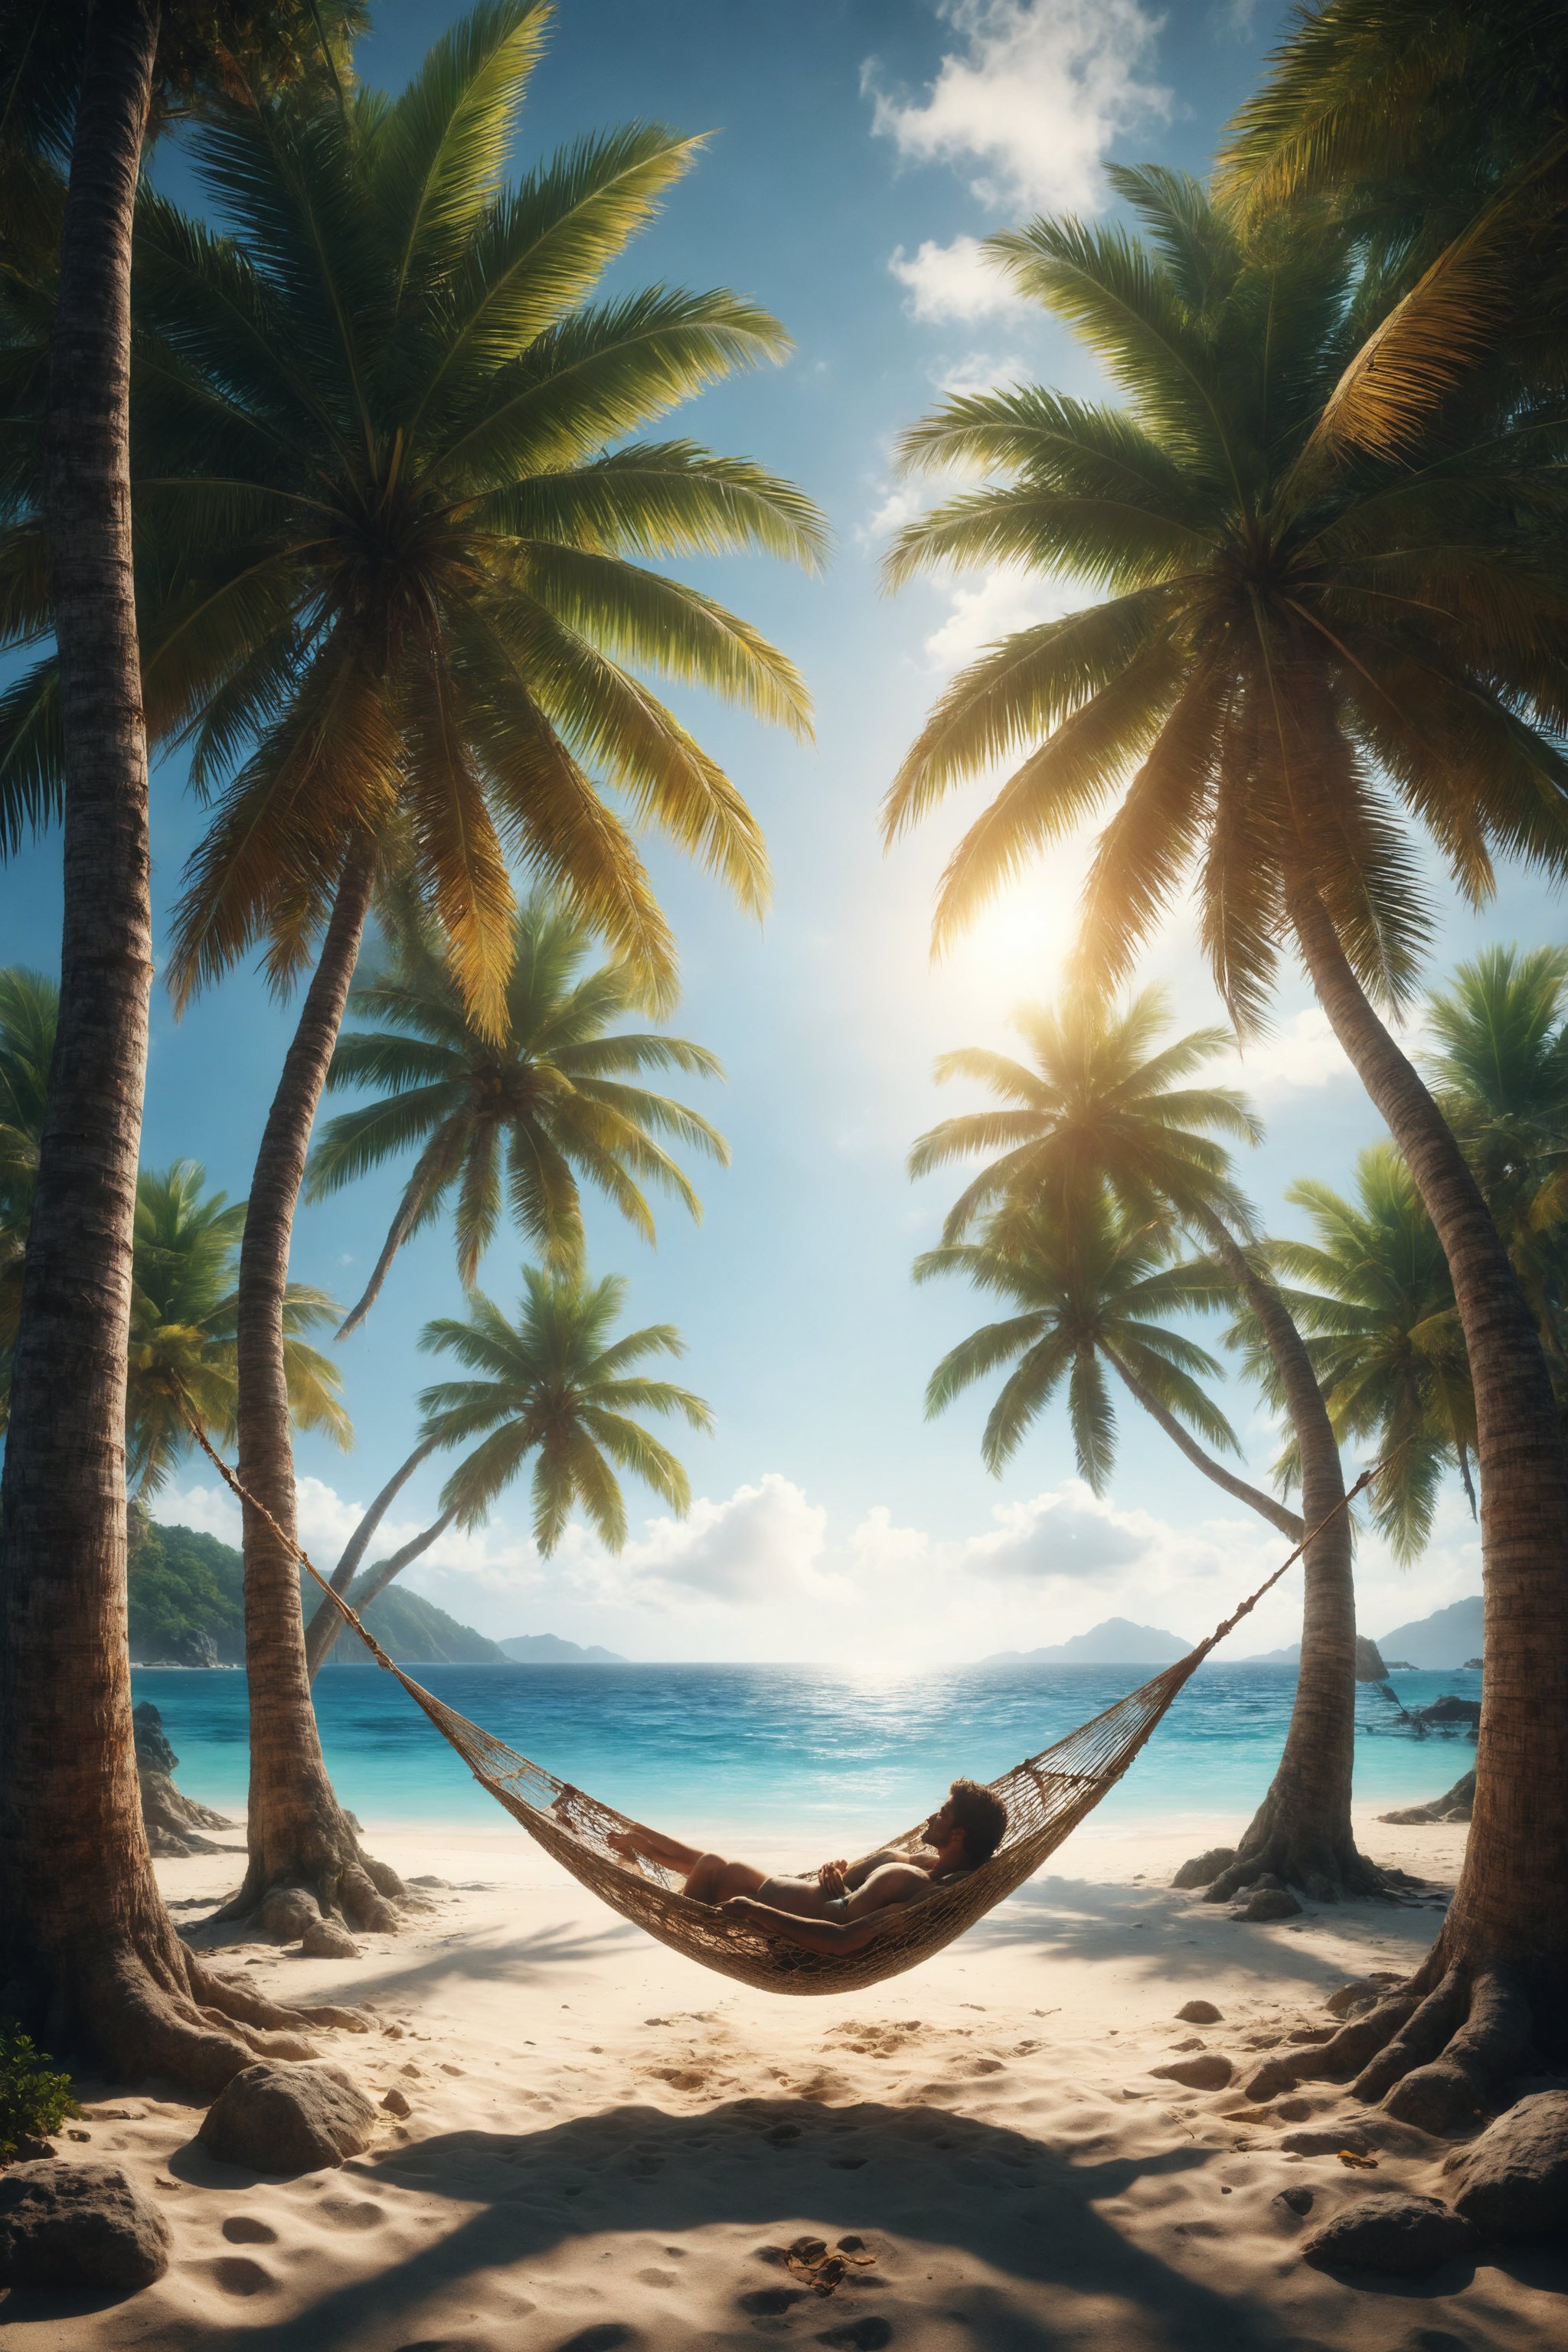 Design a scene of a person resting in a hammock strung between two palm trees on a tropical island.